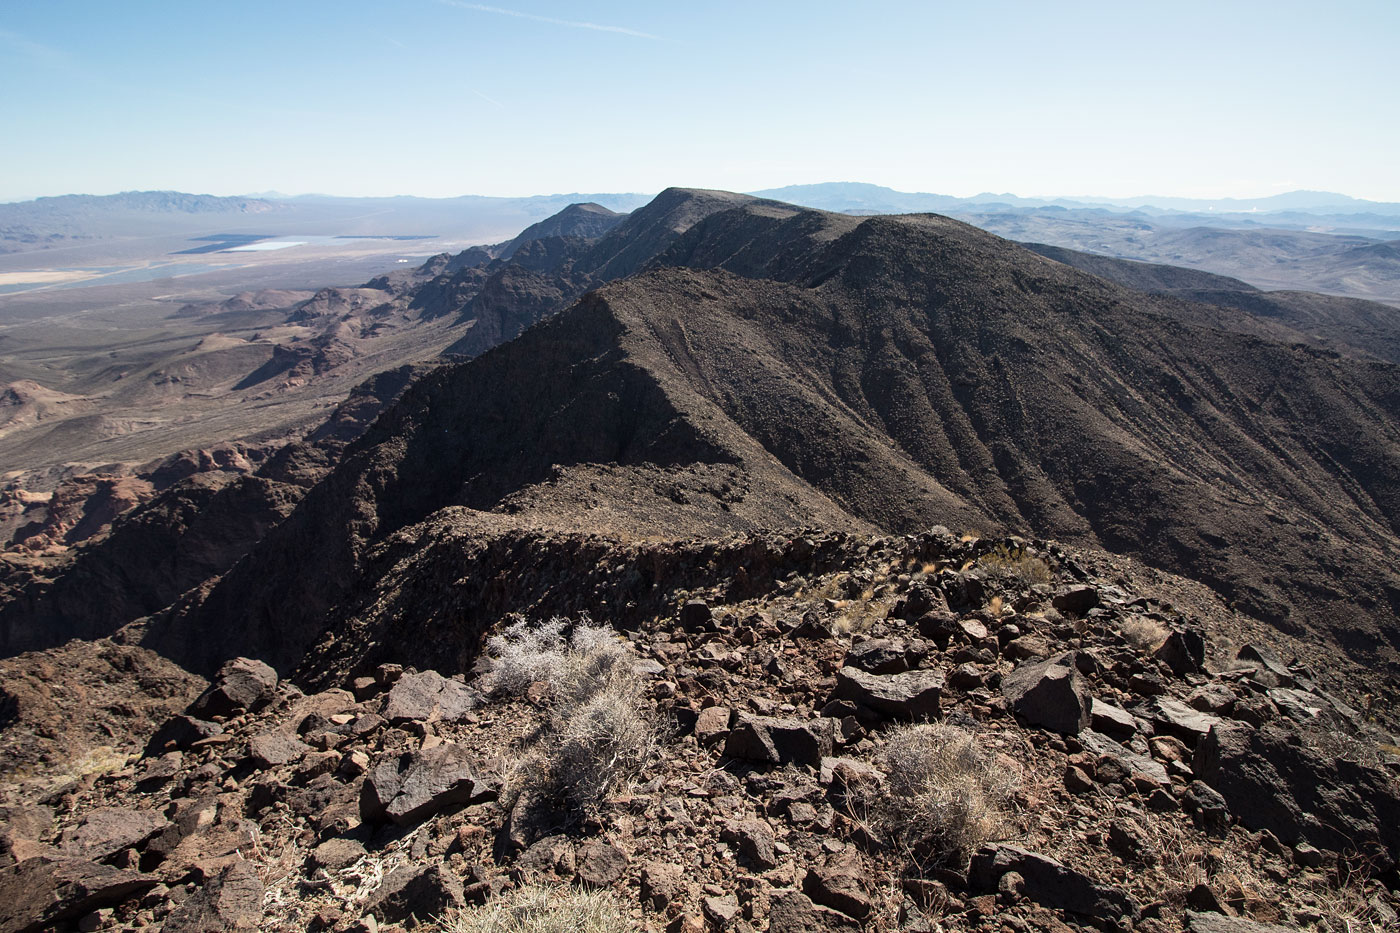 Hike Black Mountain, Fracture Ridge, North McCullough Mountain in Sloan Canyon National Conservation Area, Nevada - Stav is Lost